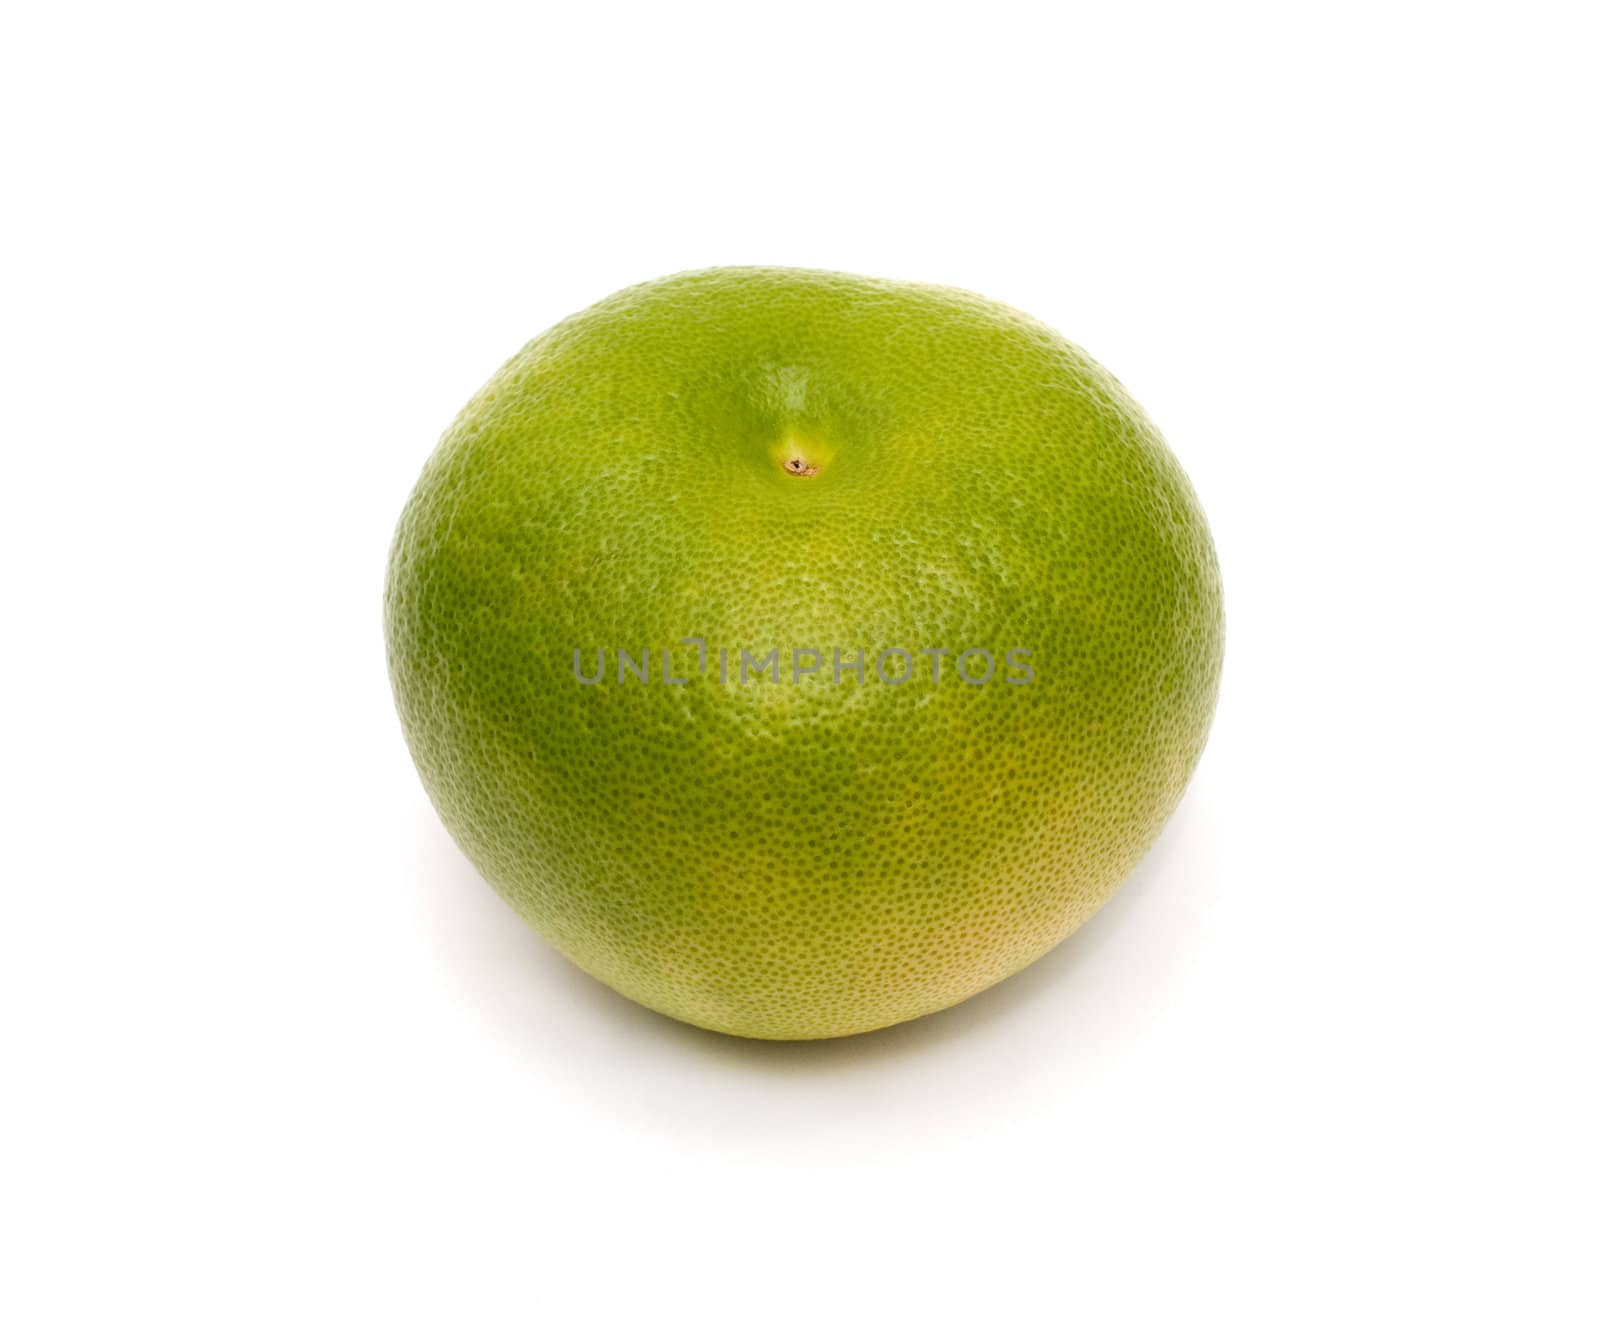 Green Grapefruit isolated on a white background